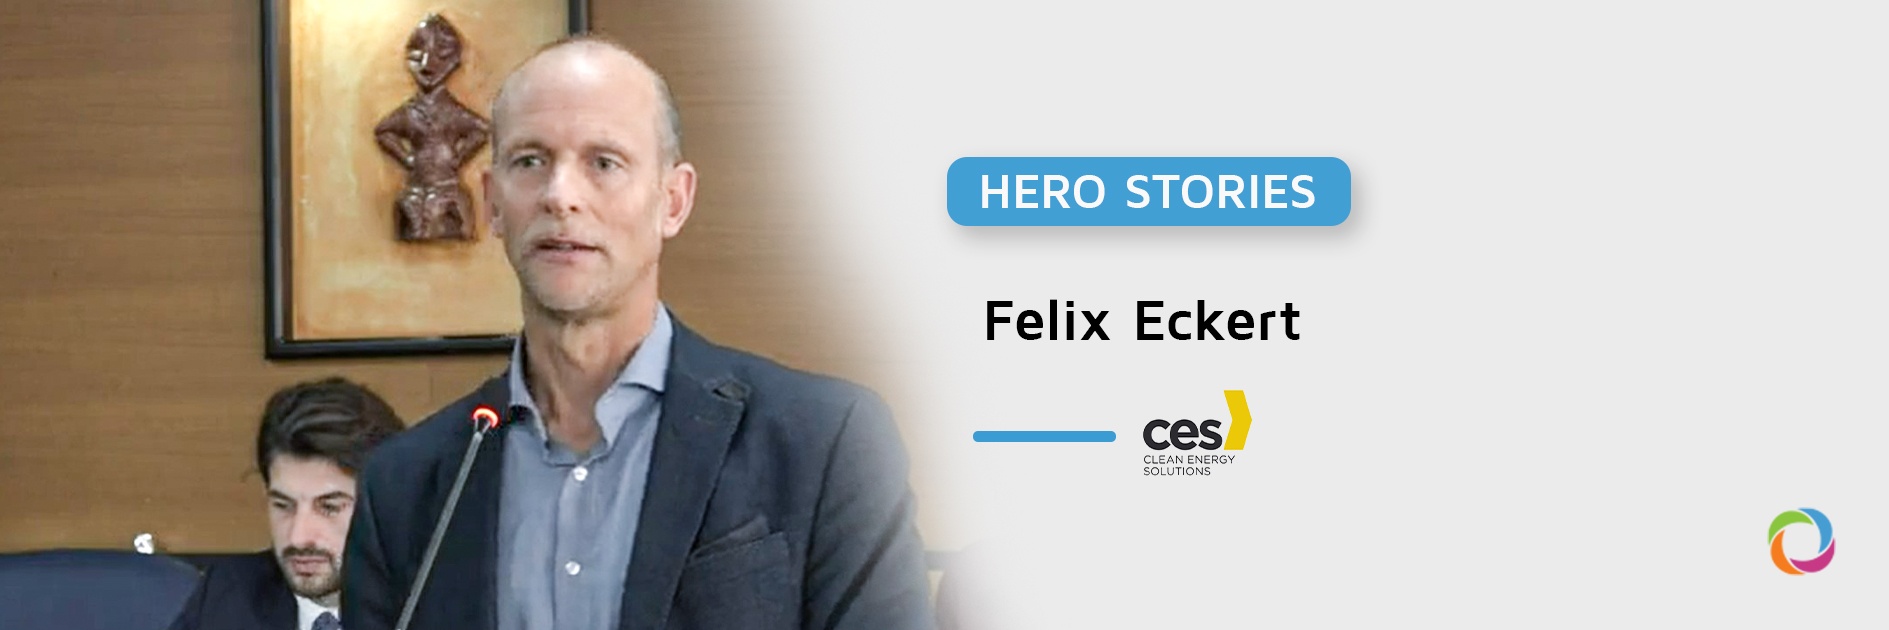 Hero Stories | Felix Eckert: “The renewable energy sector is the only future we have”